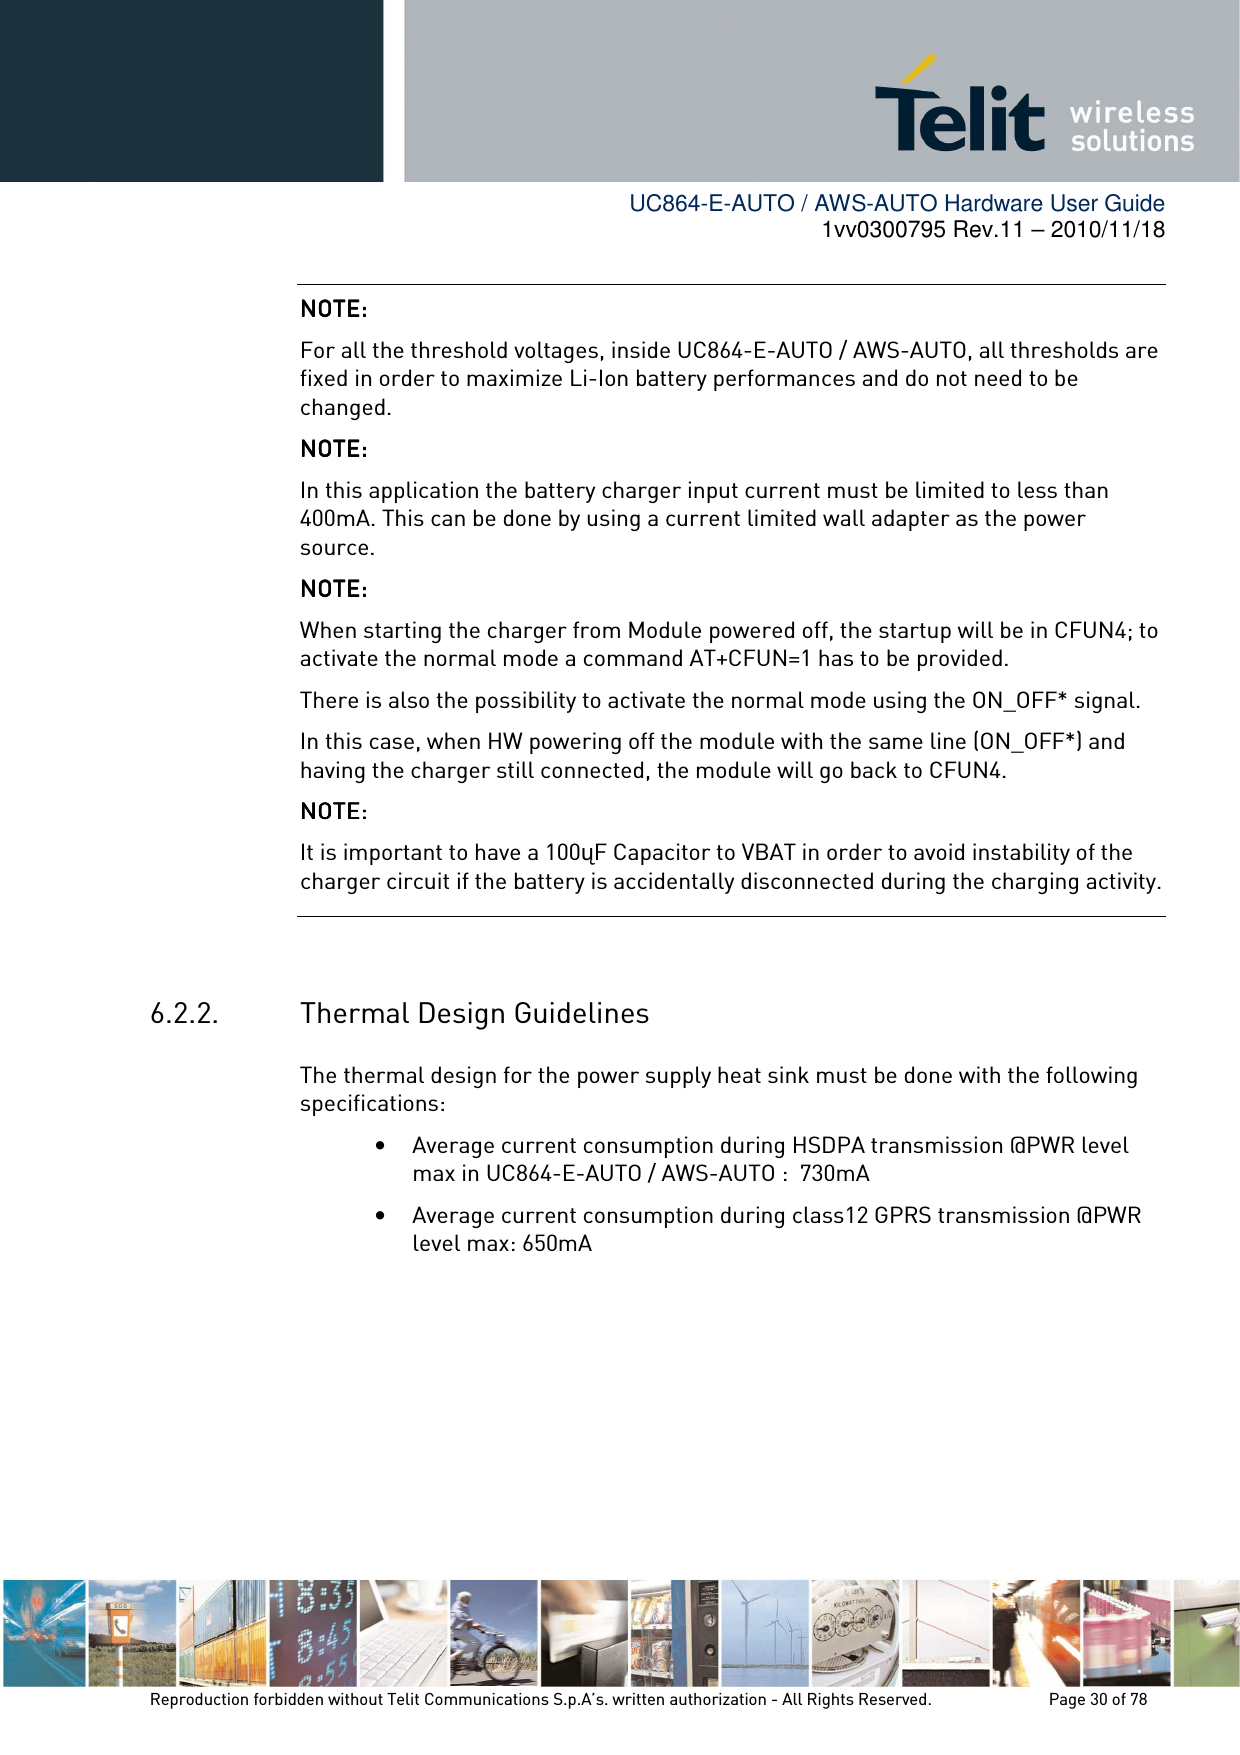        UC864-E-AUTO / AWS-AUTO Hardware User Guide 1vv0300795 Rev.11 – 2010/11/18     Reproduction forbidden without Telit Communications S.p.A’s. written authorization - All Rights Reserved.    Page 30 of 78      6.2.2. Thermal Design Guidelines The thermal design for the power supply heat sink must be done with the following specifications: • Average current consumption during HSDPA transmission @PWR level max in UC864-E-AUTO / AWS-AUTO :  730mA • Average current consumption during class12 GPRS transmission @PWR level max: 650mA  NOTE: NOTE: NOTE: NOTE:     For all the threshold voltages, inside UC864-E-AUTO / AWS-AUTO, all thresholds are fixed in order to maximize Li-Ion battery performances and do not need to be changed. NOTE: NOTE: NOTE: NOTE:     In this application the battery charger input current must be limited to less than 400mA. This can be done by using a current limited wall adapter as the power  source. NOTE: NOTE: NOTE: NOTE:     When starting the charger from Module powered off, the startup will be in CFUN4; to activate the normal mode a command AT+CFUN=1 has to be provided. There is also the possibility to activate the normal mode using the ON_OFF* signal. In this case, when HW powering off the module with the same line (ON_OFF*) and having the charger still connected, the module will go back to CFUN4. NOTE:NOTE:NOTE:NOTE:        It is important to have a 100ųF Capacitor to VBAT in order to avoid instability of the charger circuit if the battery is accidentally disconnected during the charging activity. 